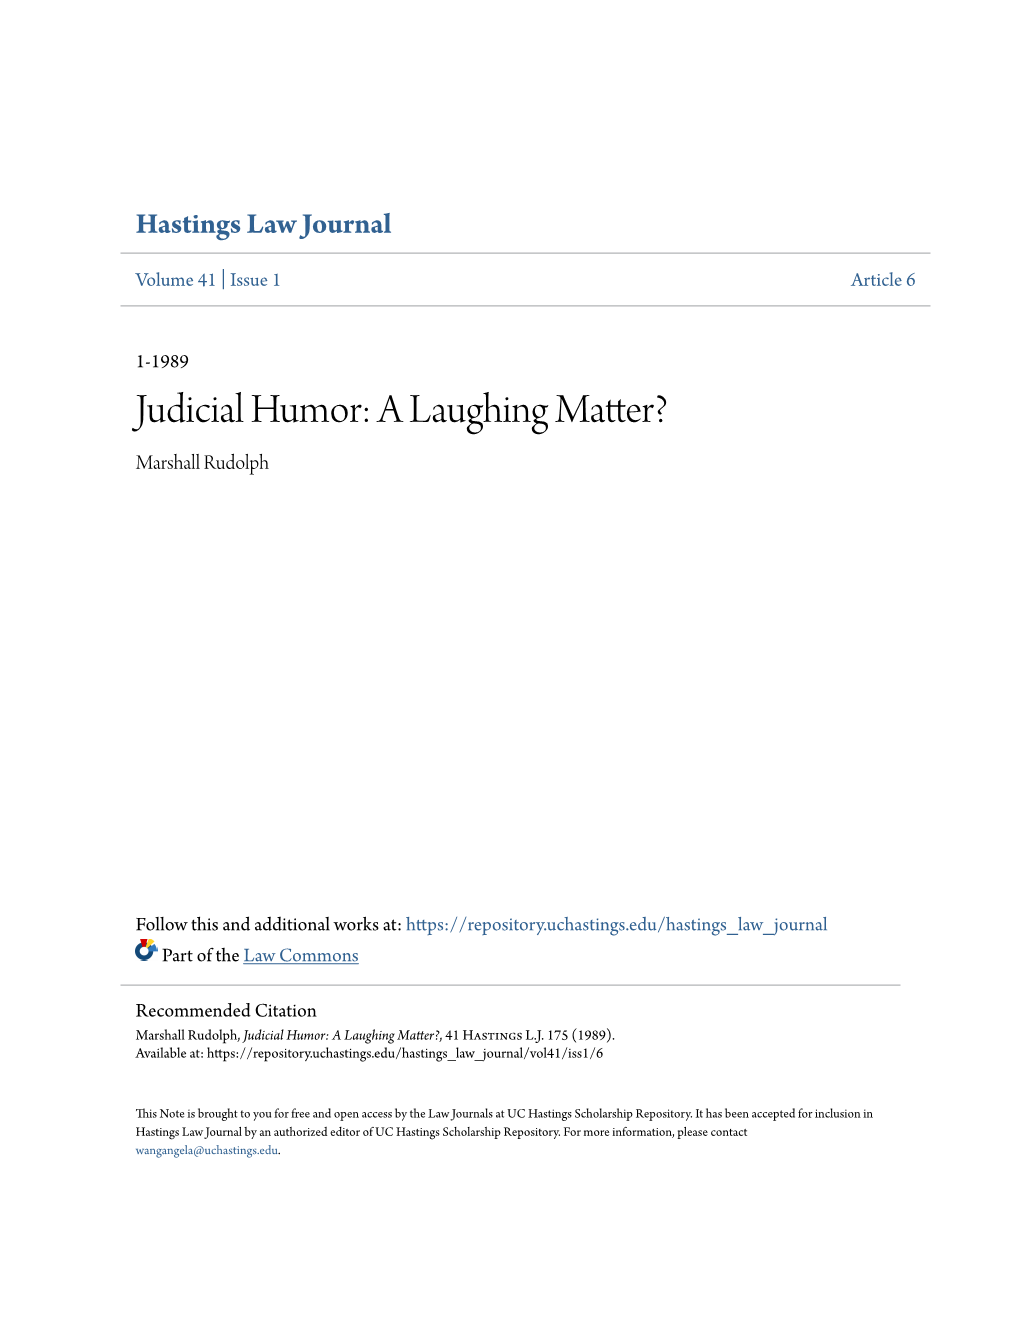 Judicial Humor: a Laughing Matter? Marshall Rudolph